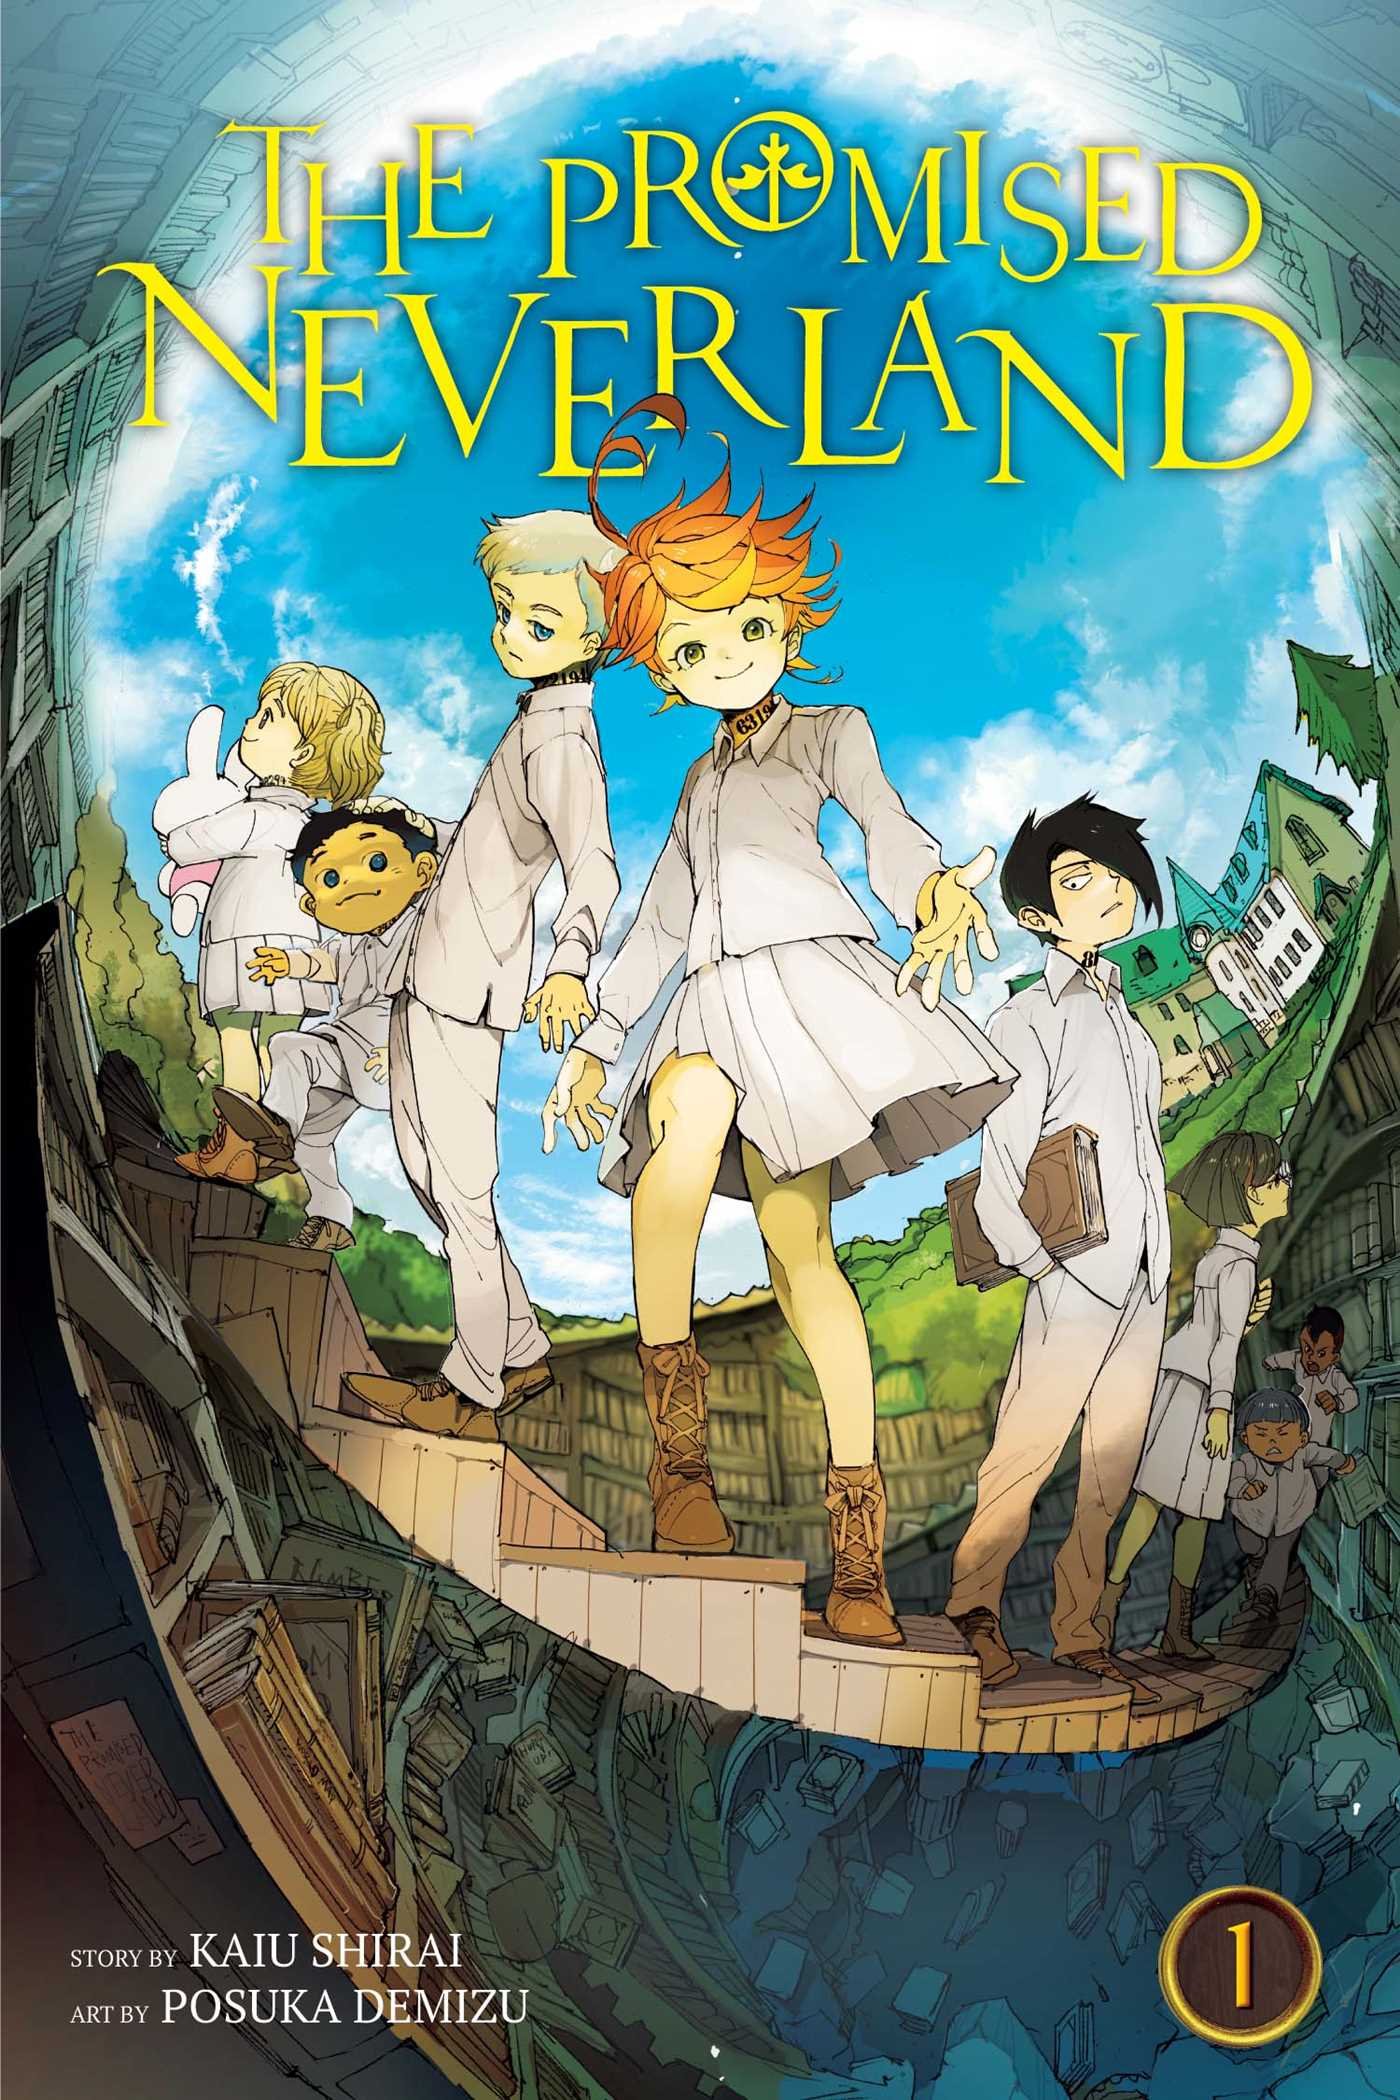 [PDF] The Promised Neverland, Vol. 1 free download book pdf